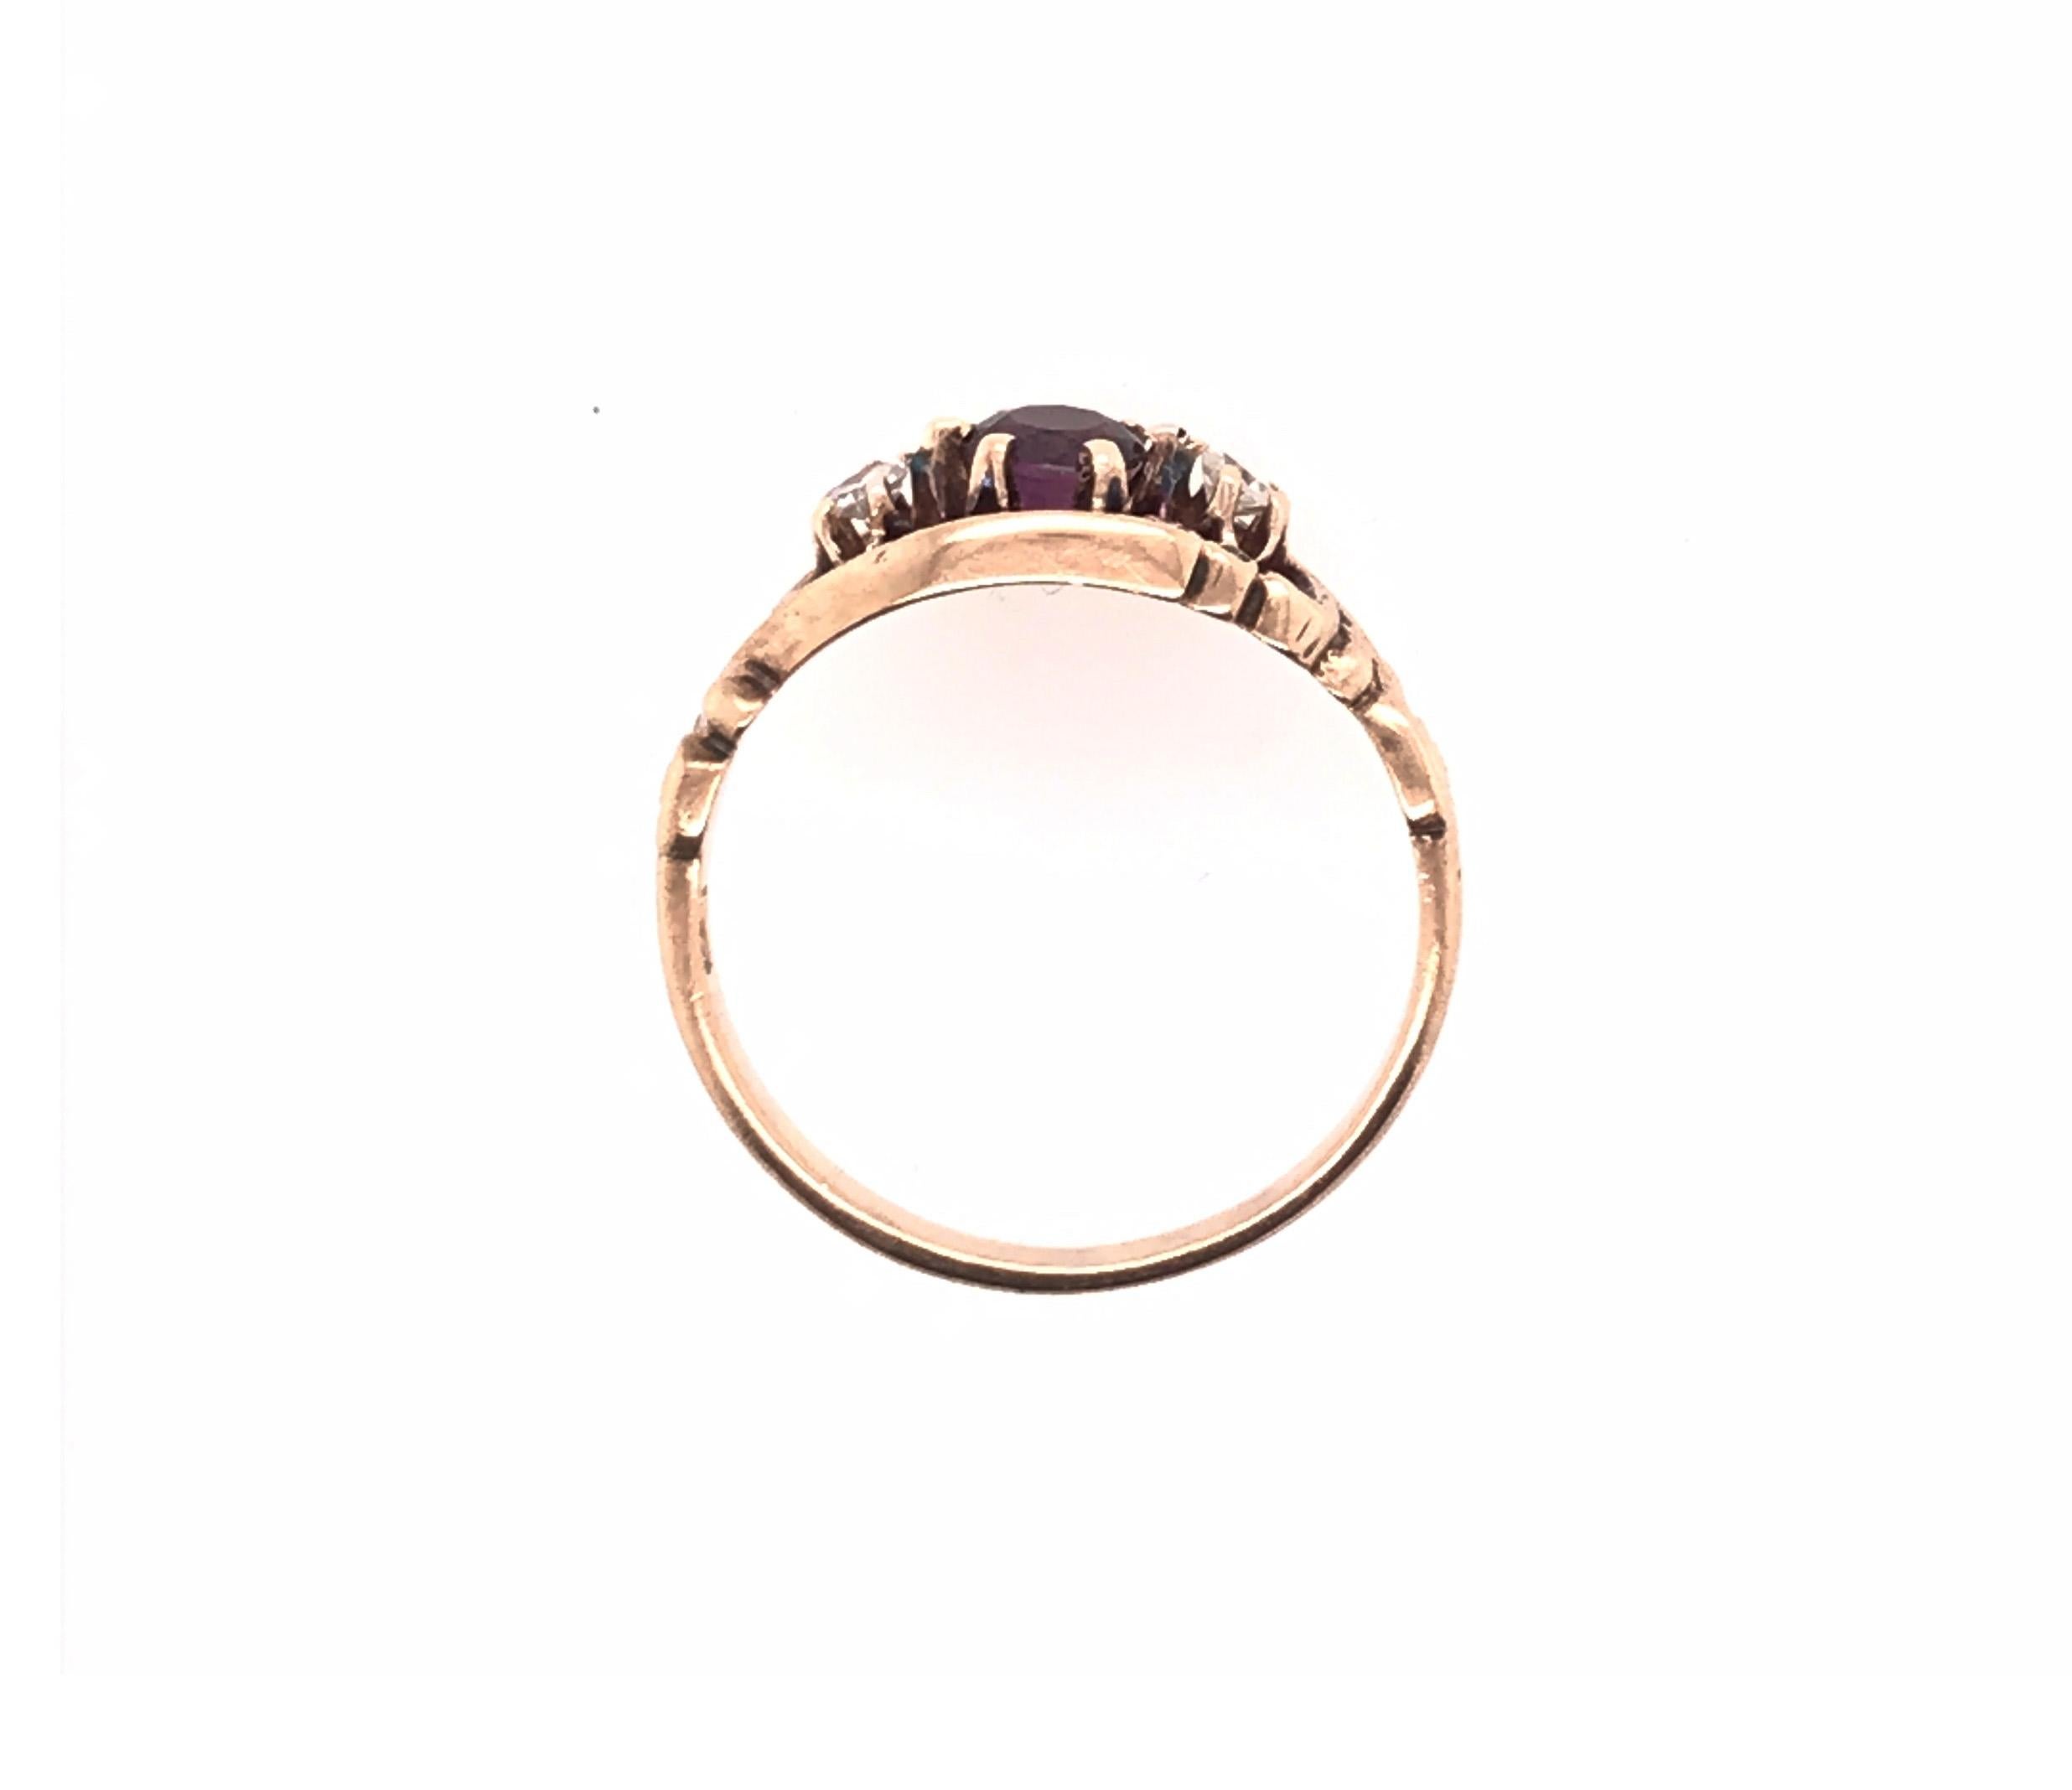 Genuine Original Victorian Antique from 1890's-1900's Ruby Diamond .66ct Cocktail Ring Yellow Gold  


Features a Genuine Natural .60ct Round Ruby Gemstone Center

Deep Hand Carved Engraving

100% Natural Mined Diamonds & Ruby Gemstone

.66 Carat